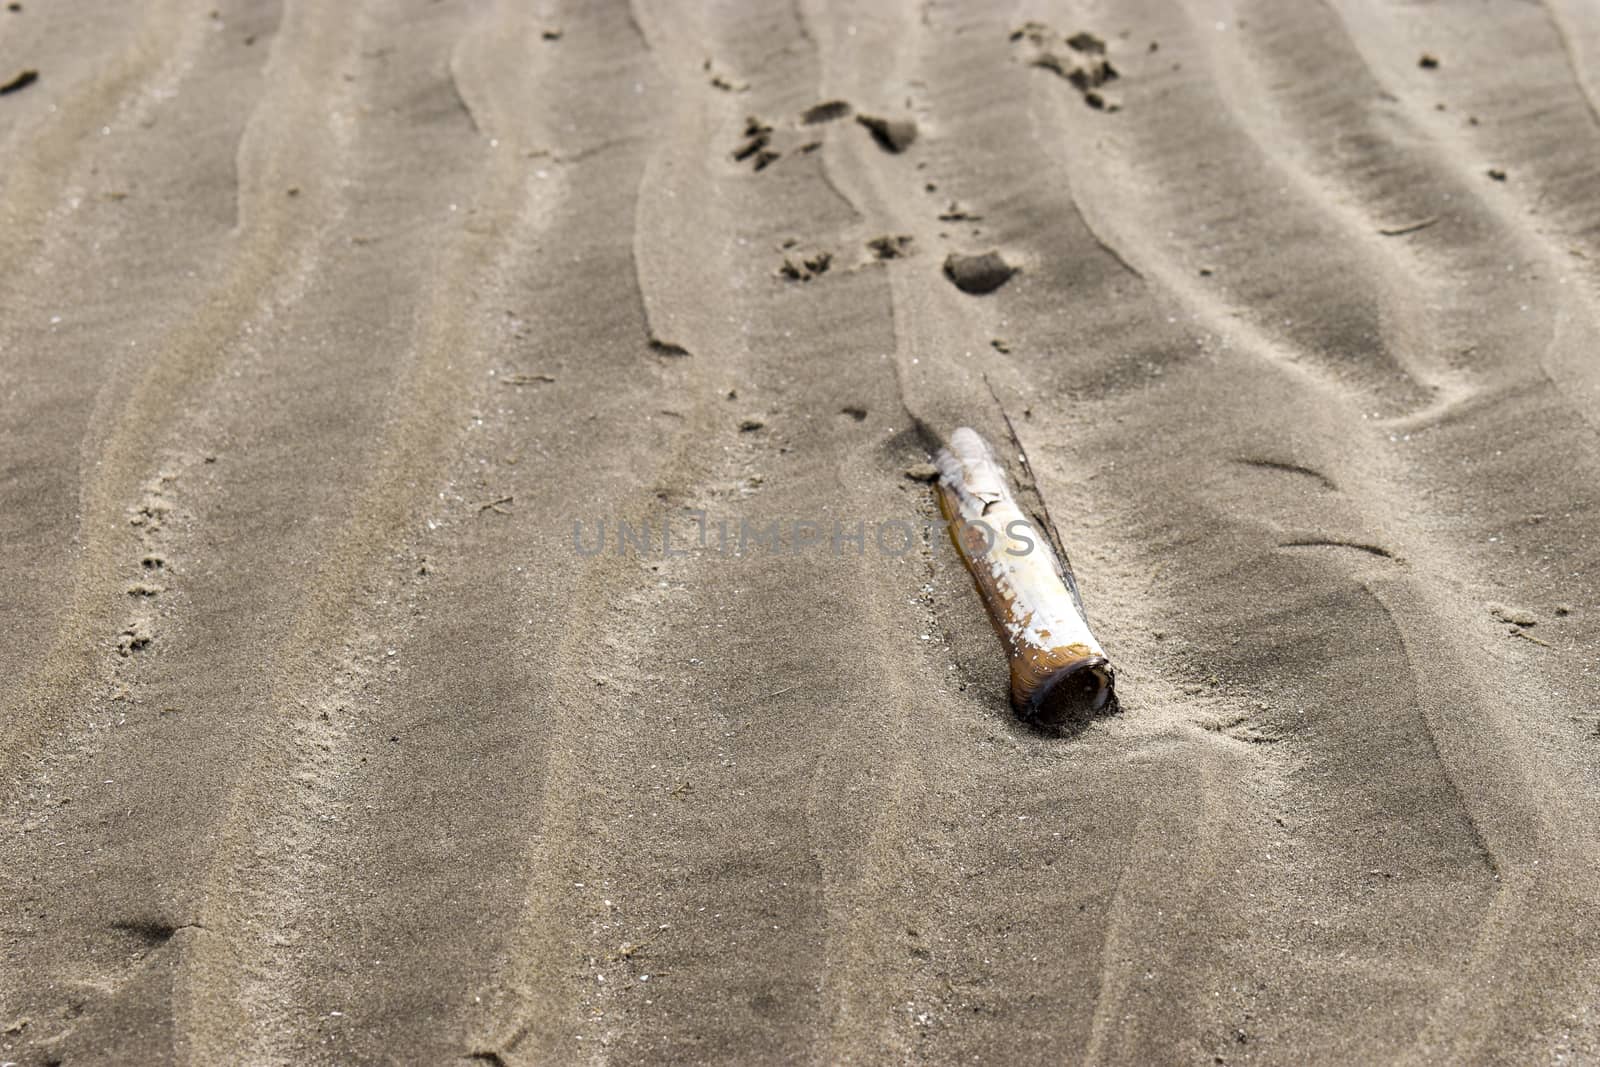 Razor clam shell on a sandy beach in Ireland background by benentaylor